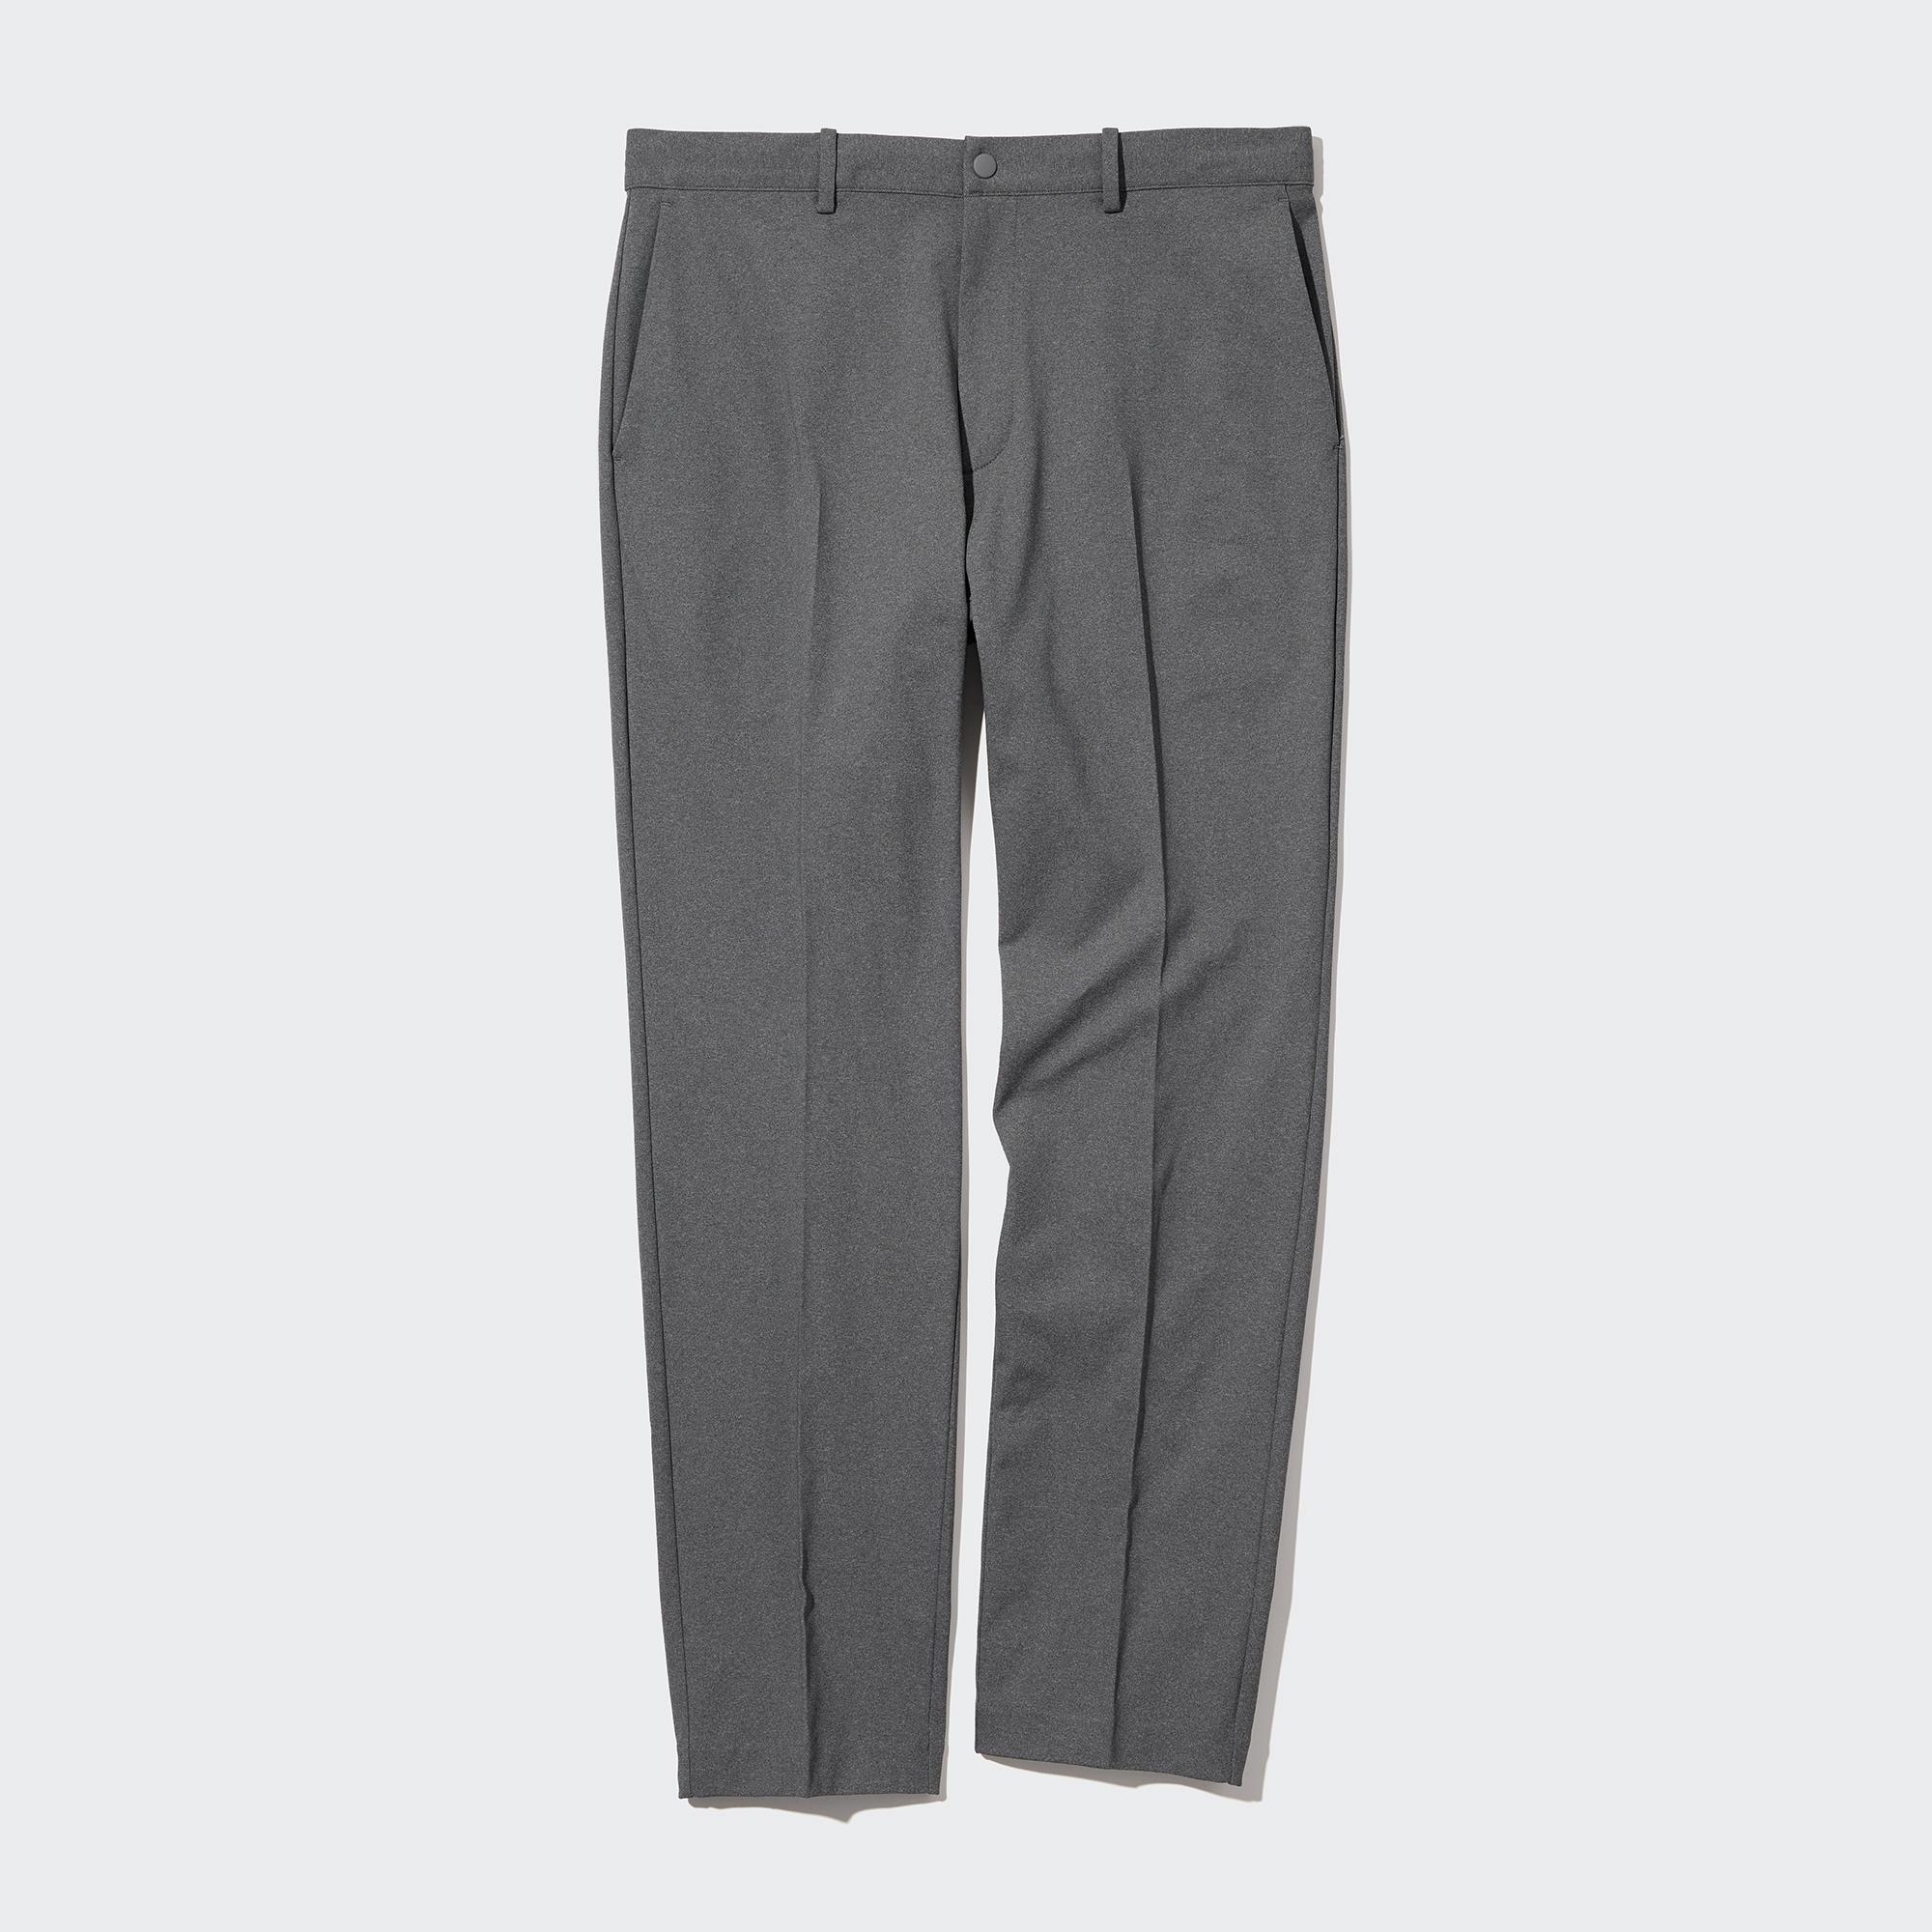 AirSense Relaxed Fit Trousers | UNIQLO EU